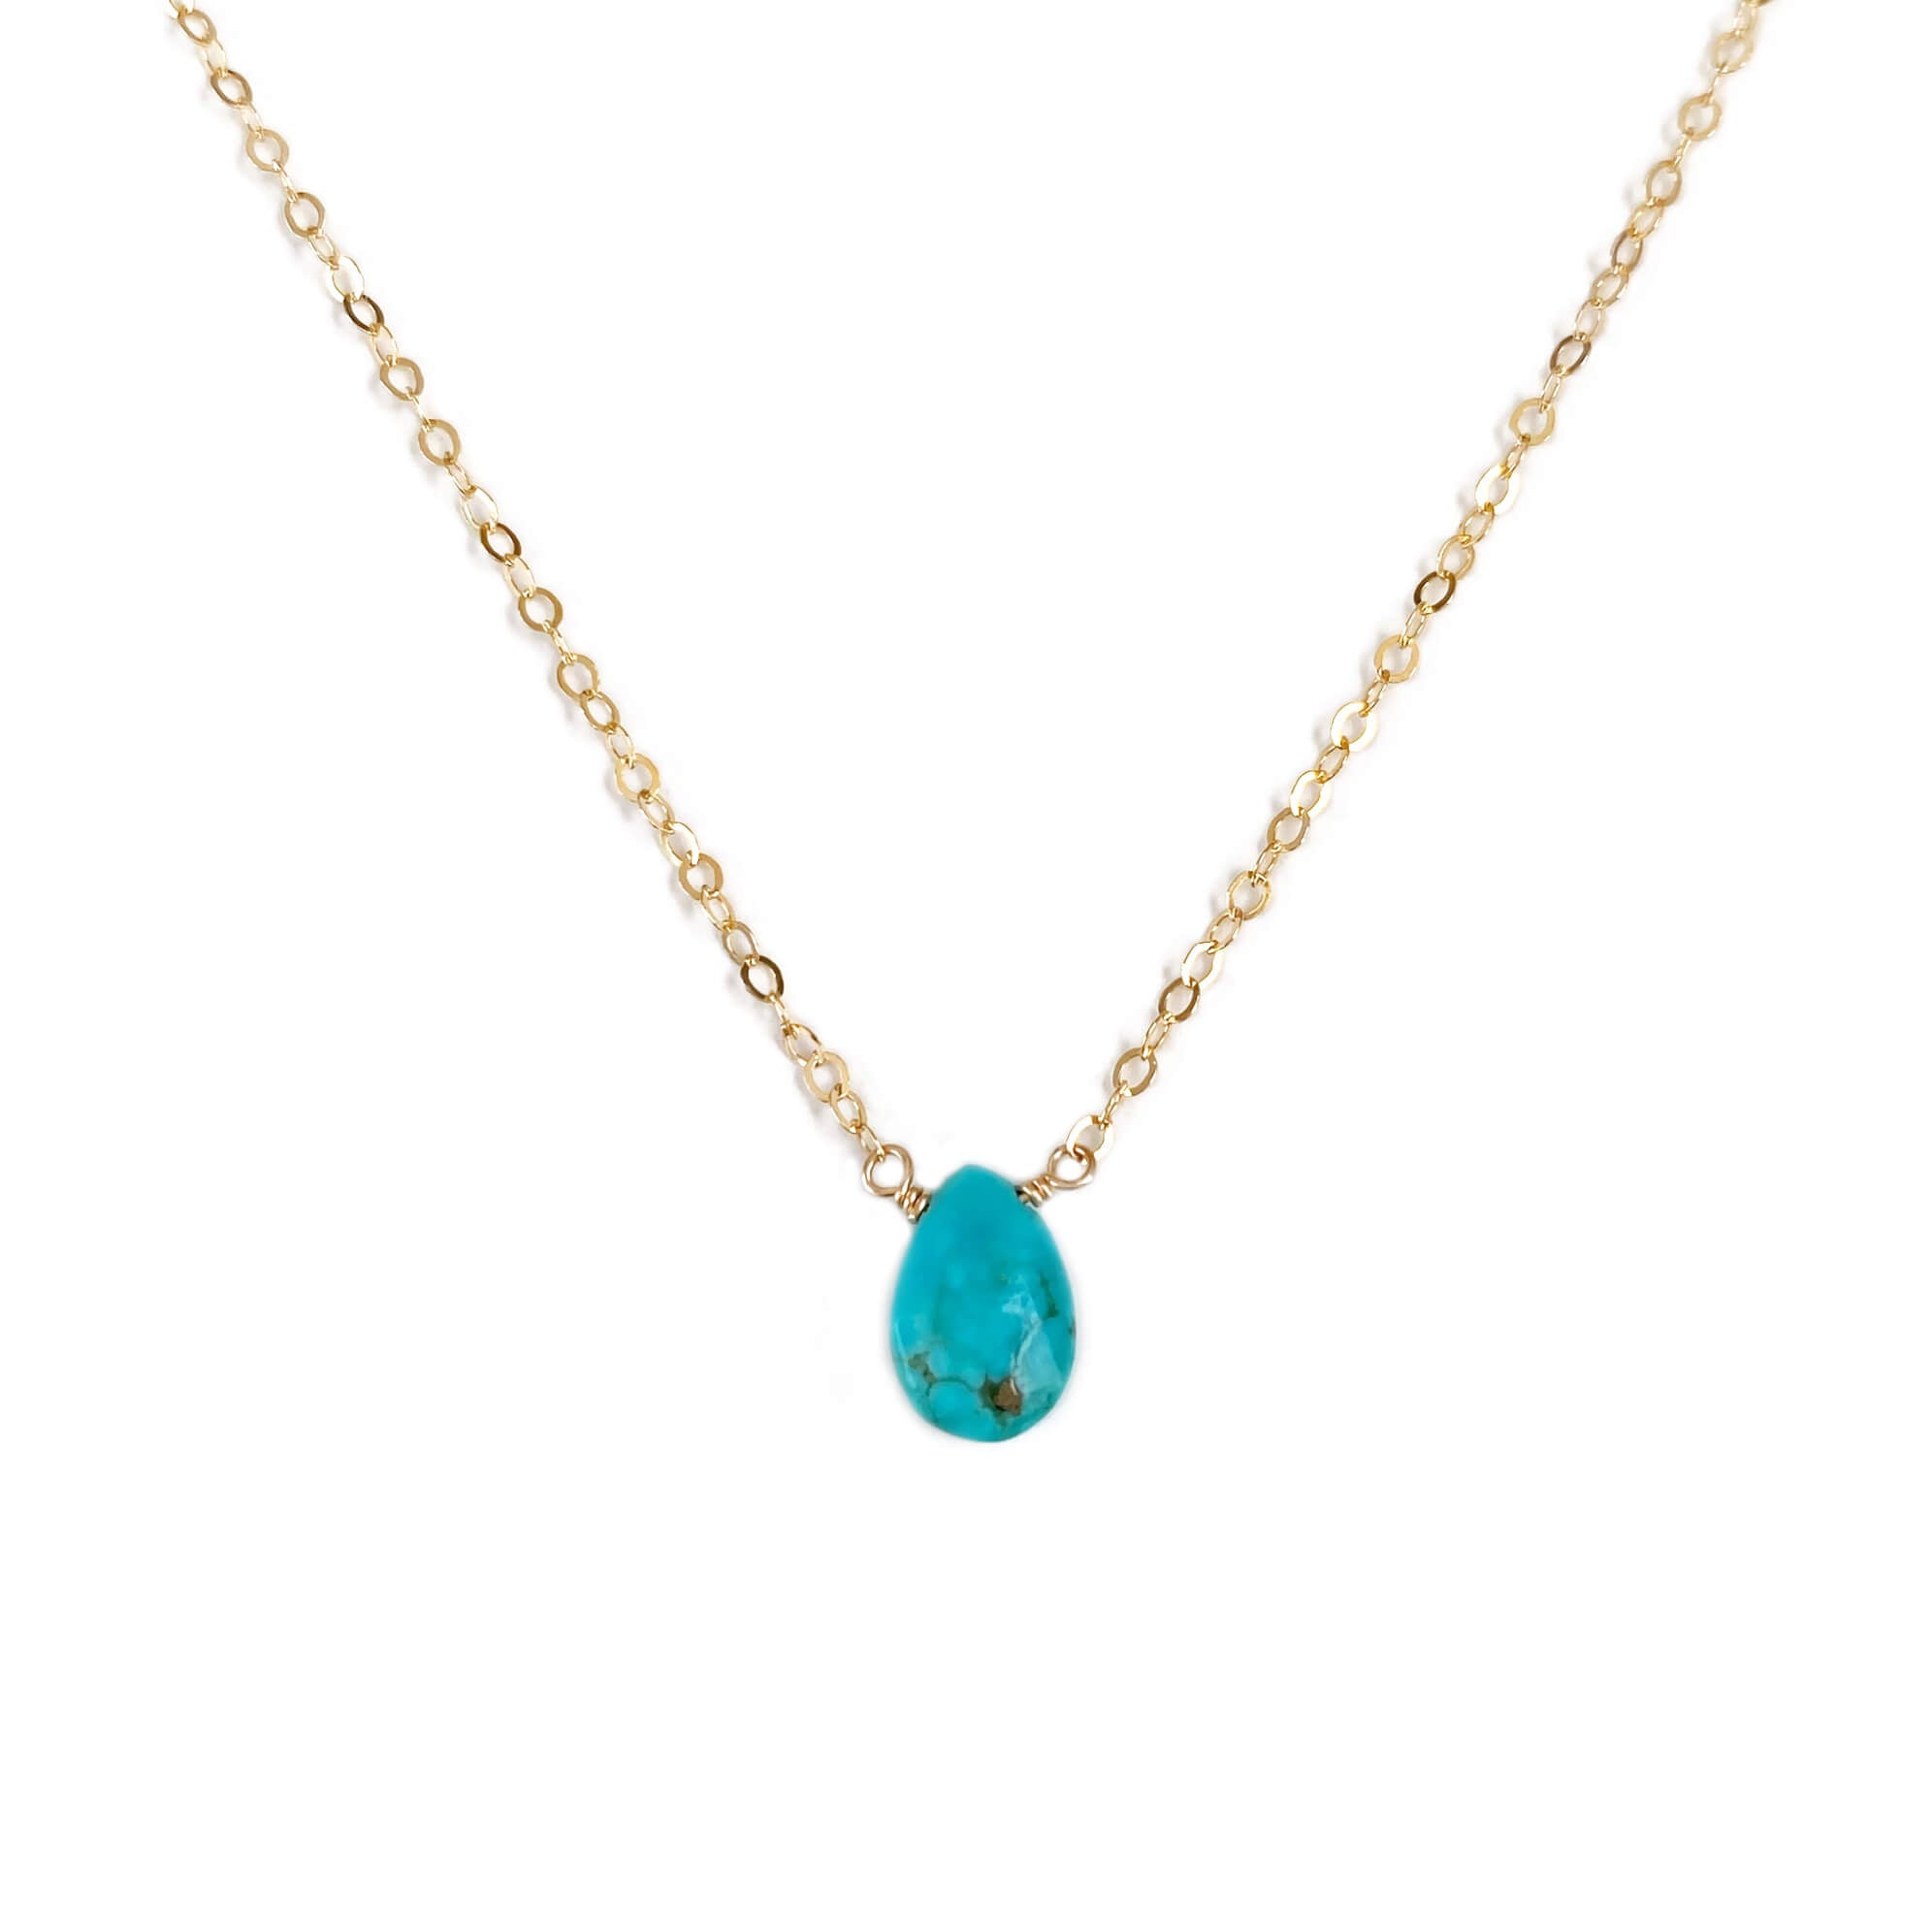 This dainty turquoise necklace is cute and simple.  It's made of a single real turquoise bead and 14k dainty gold chain.  The turquoise stone color is bright blue with some pyrite inclusion in it. Each gemstone is unique and no two are the same. 